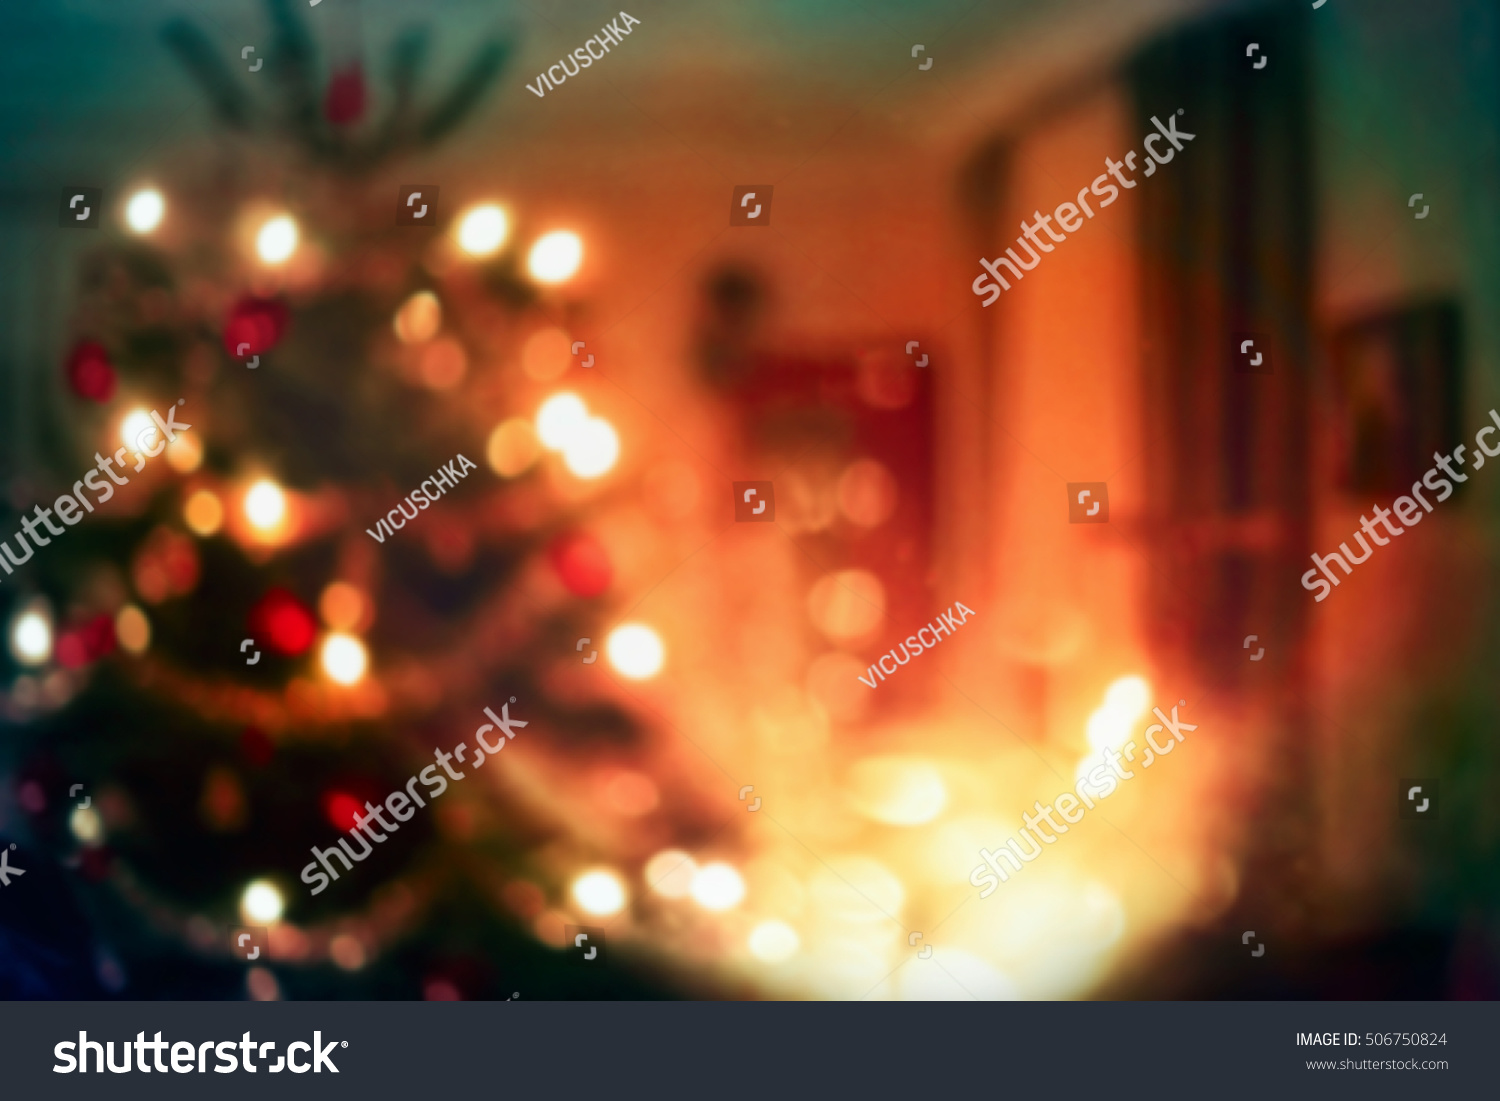 Christmas home room with tree and festive bokeh lighting, blurred holiday background #506750824